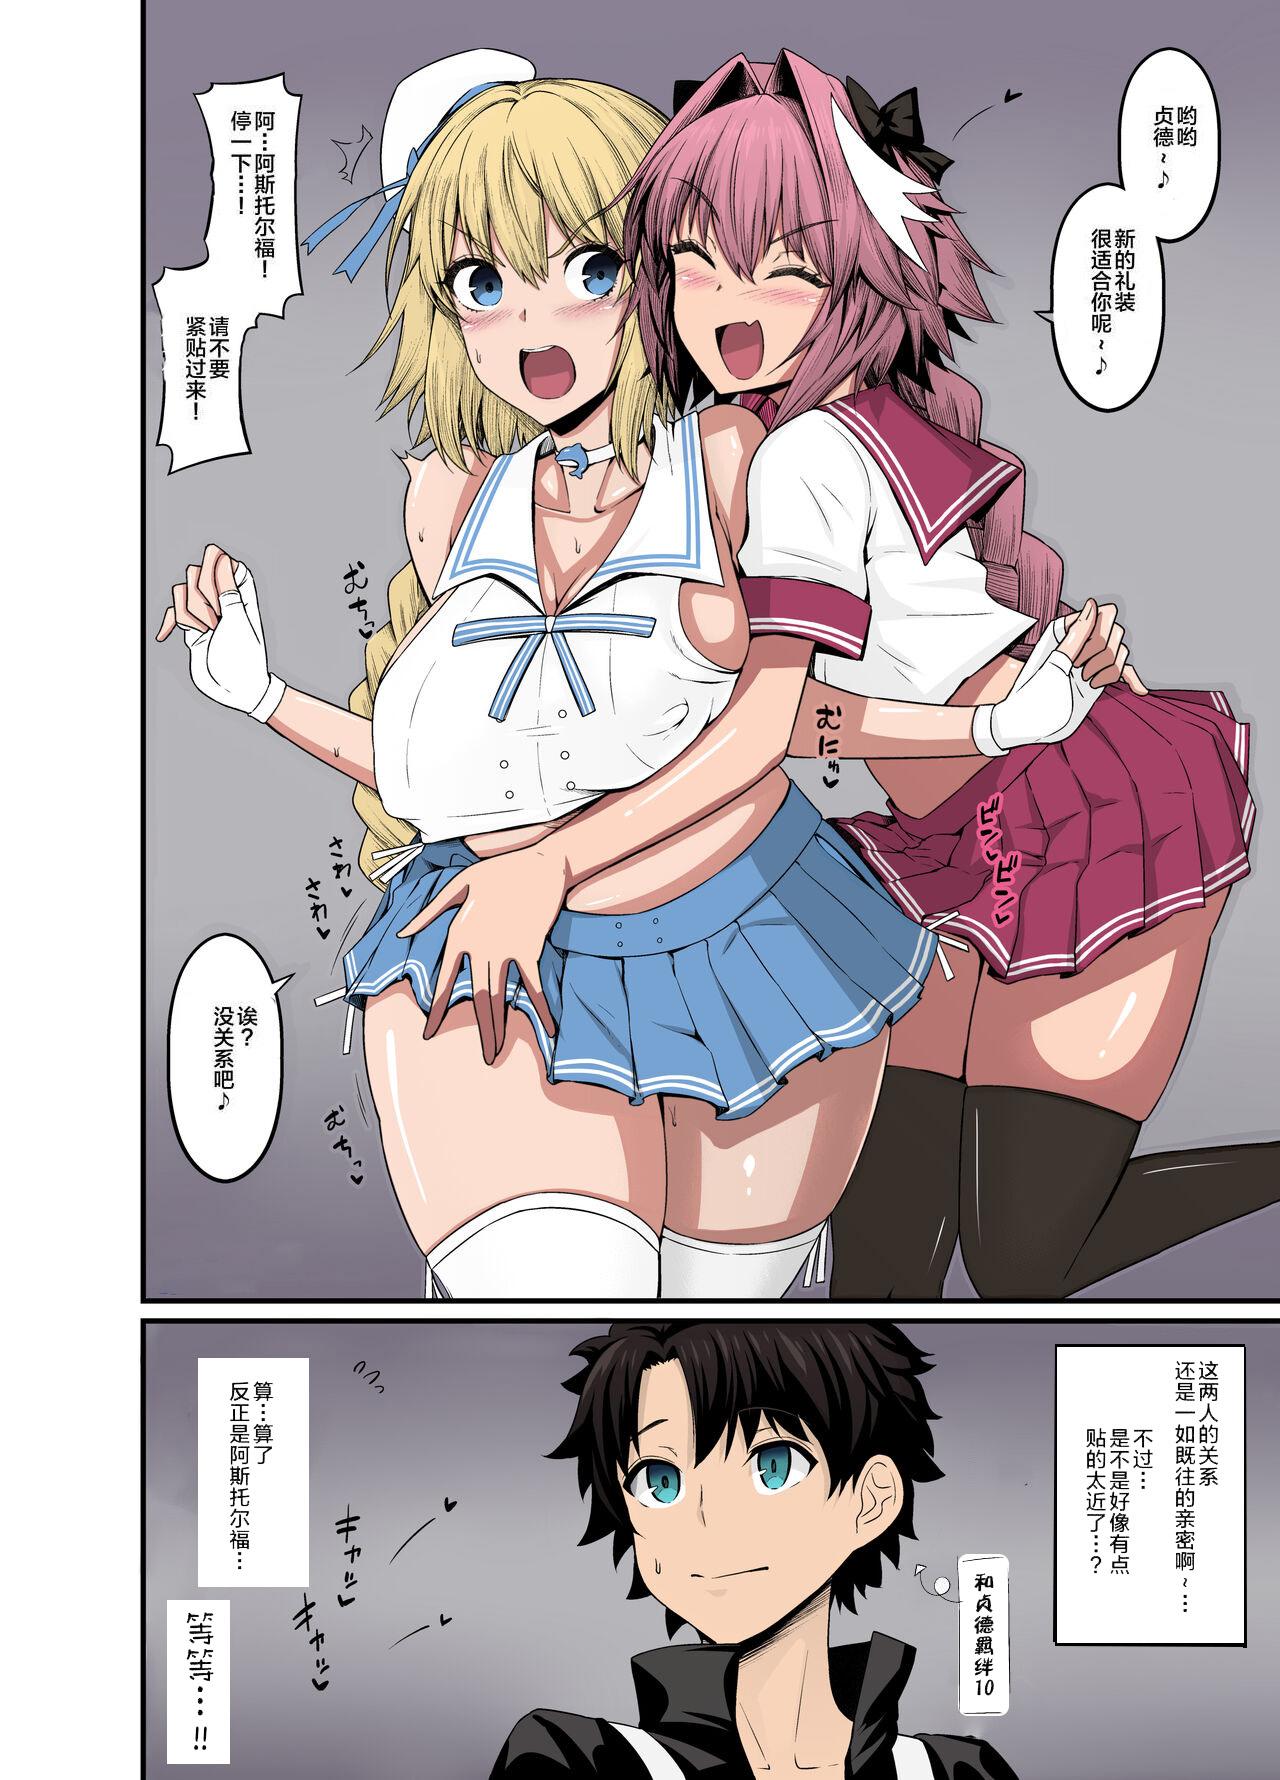 Buceta [Ankoman] Astolfo，Jeanne to Nakayoku suru (Fate/Grand Order)][Chinese] - Fate grand order Indian Sex - Picture 1